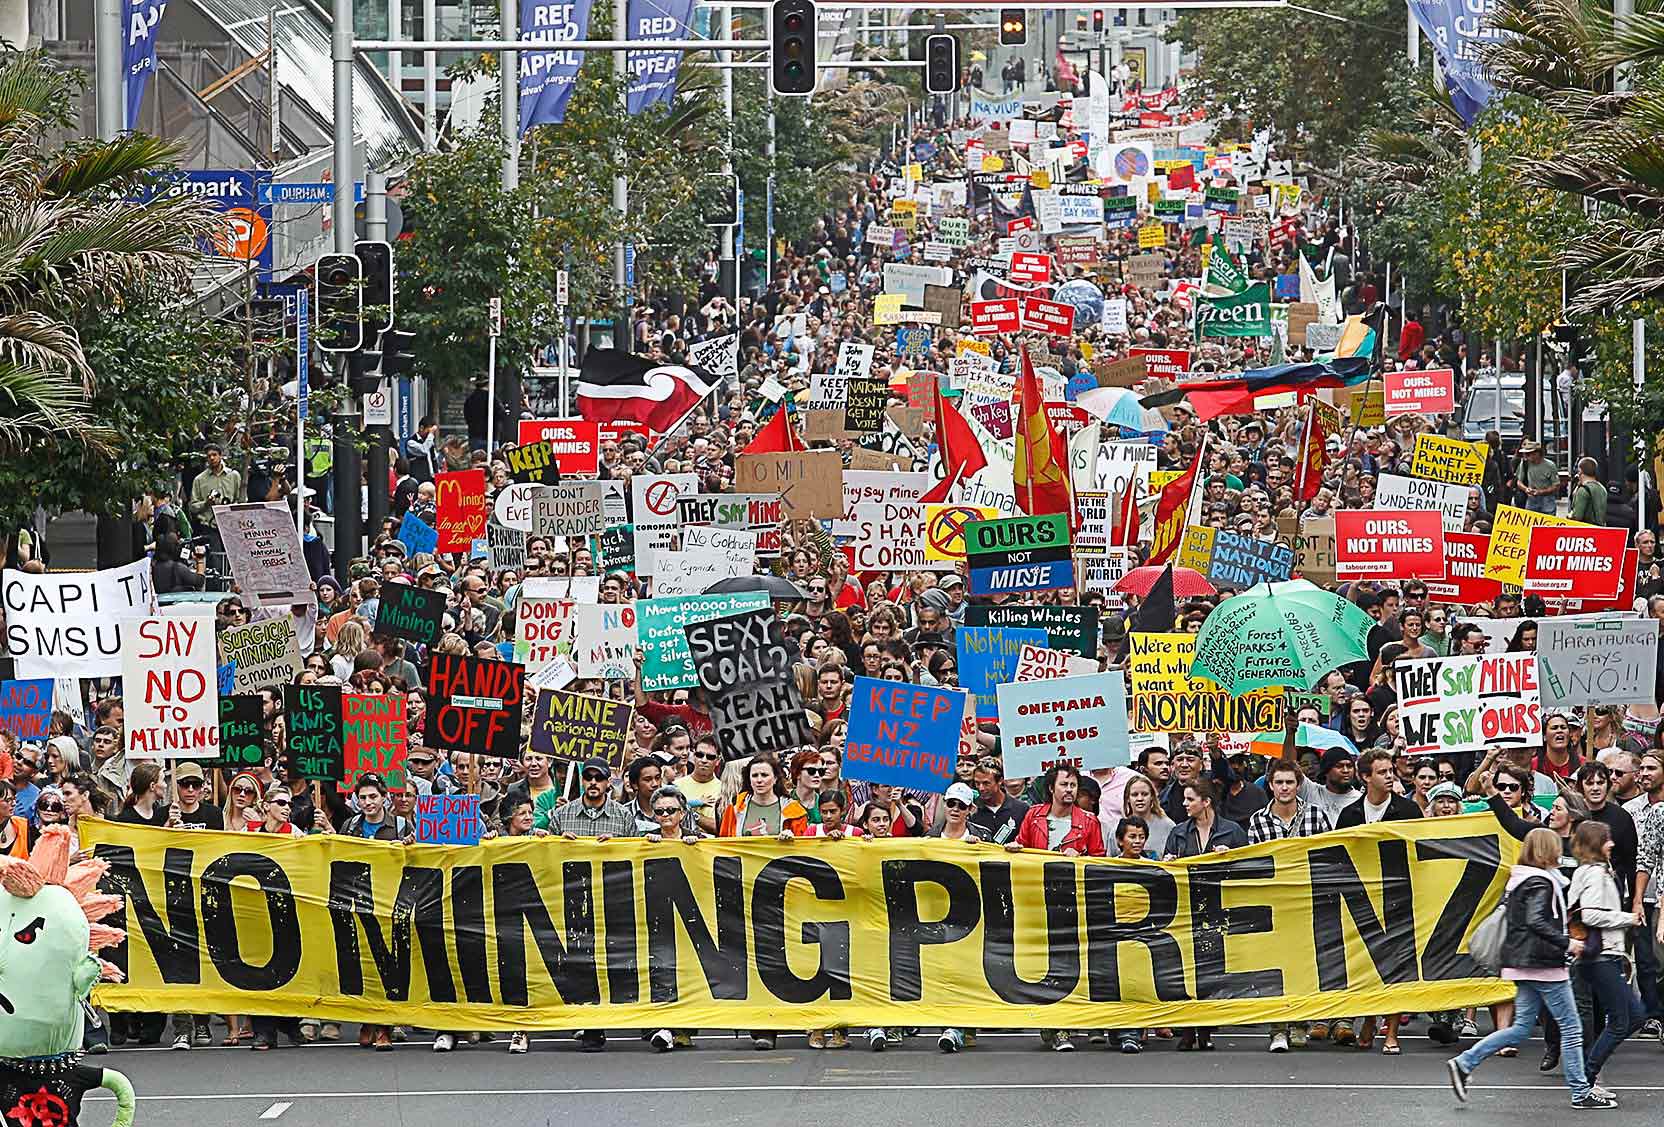 Thousands march in the street to 'stop mining pure NZ'